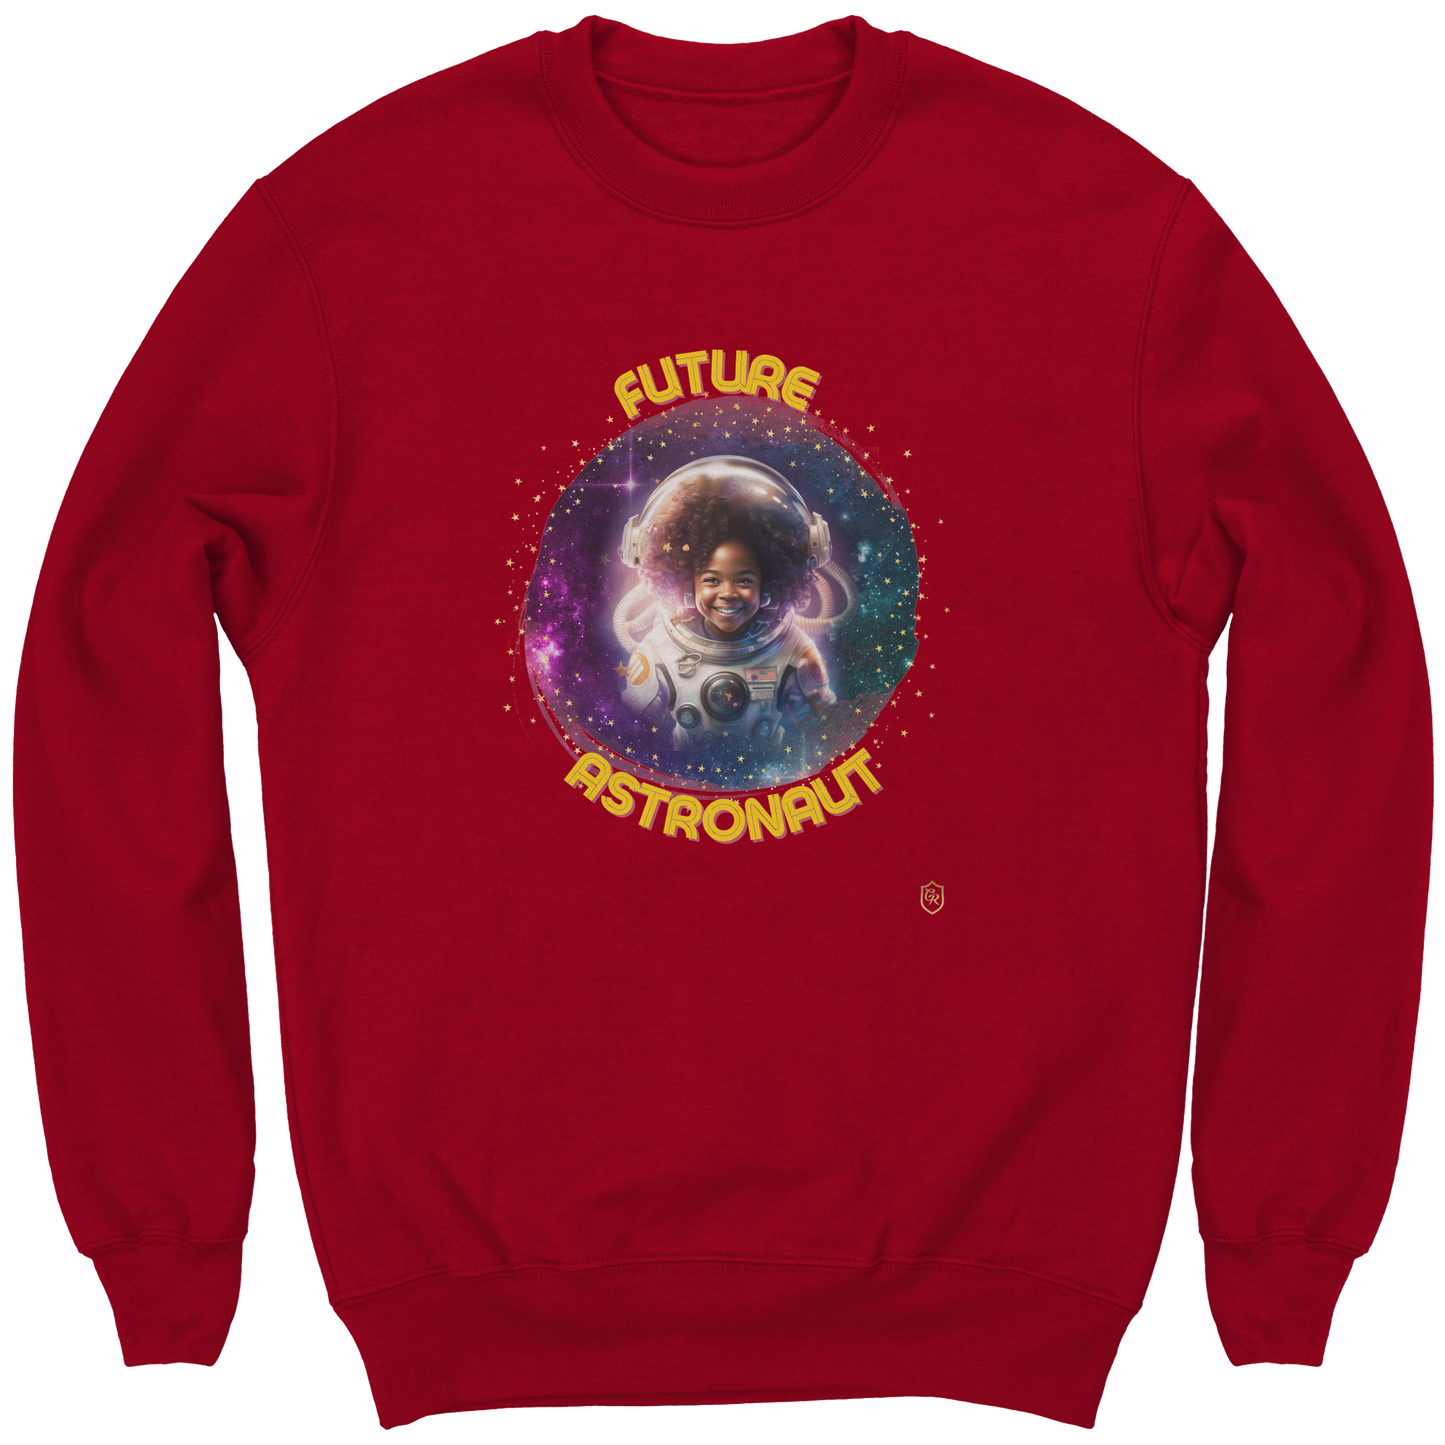 Young Girl's Galactic Explorer Sweatshirt: The Official Astronaut Gear of the Future